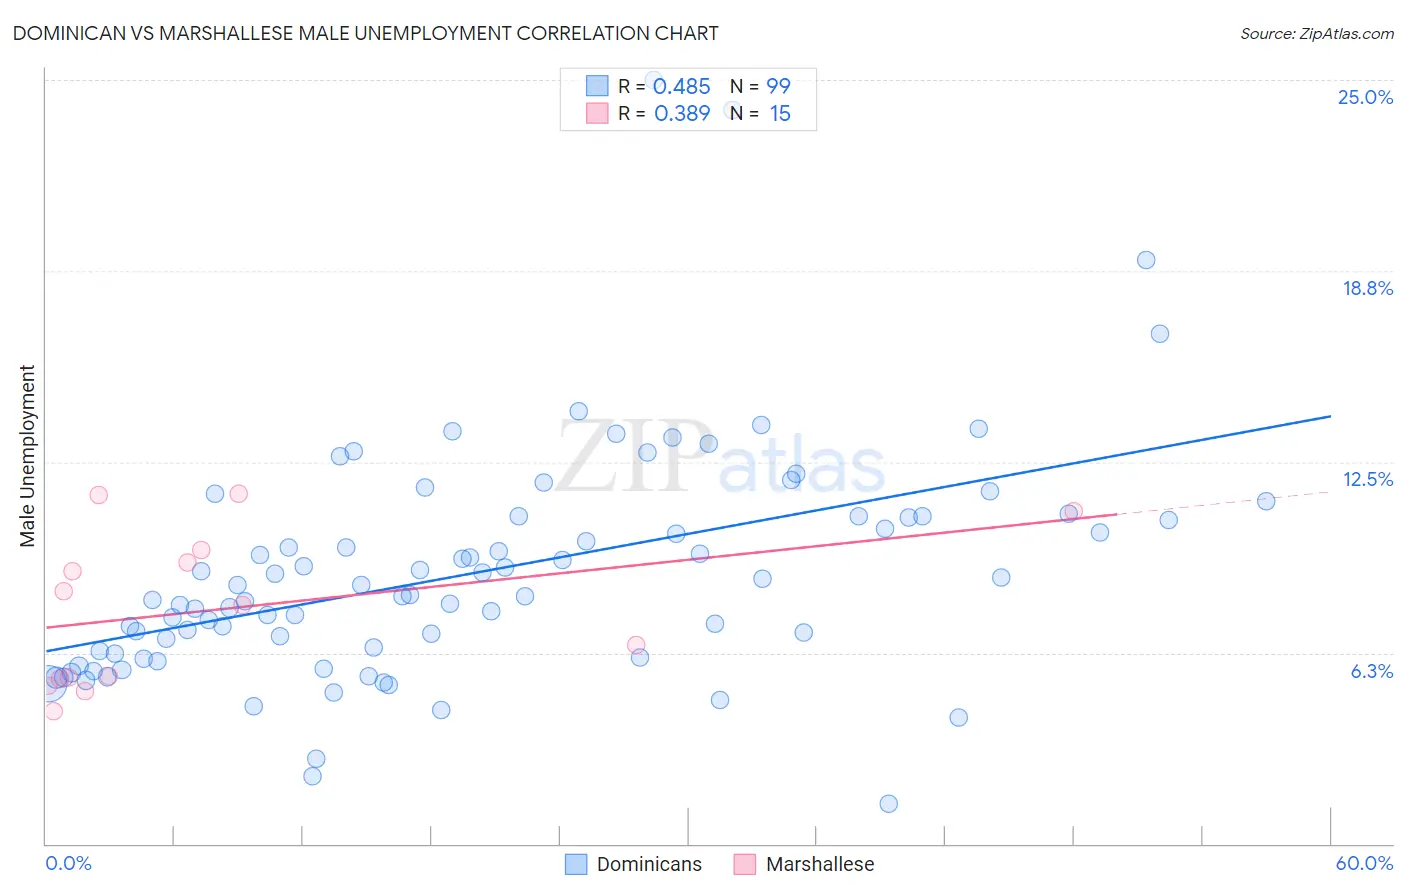 Dominican vs Marshallese Male Unemployment